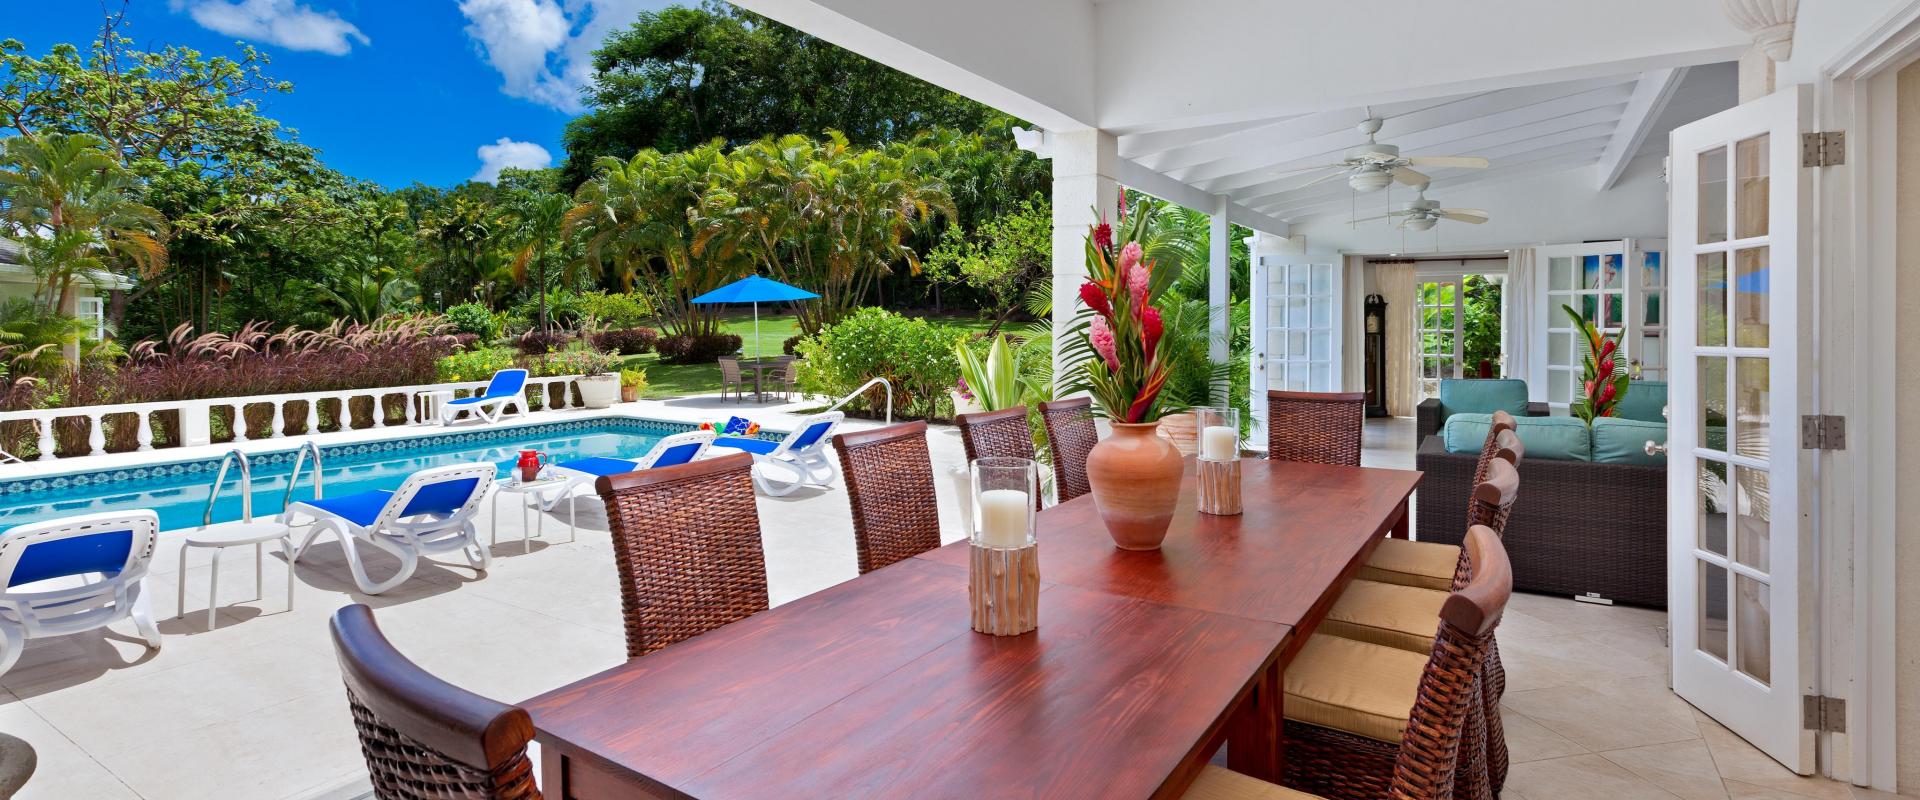 Barbados Holiday Rental Rose Of Sharon Sandy Lane Dining and Patio Area